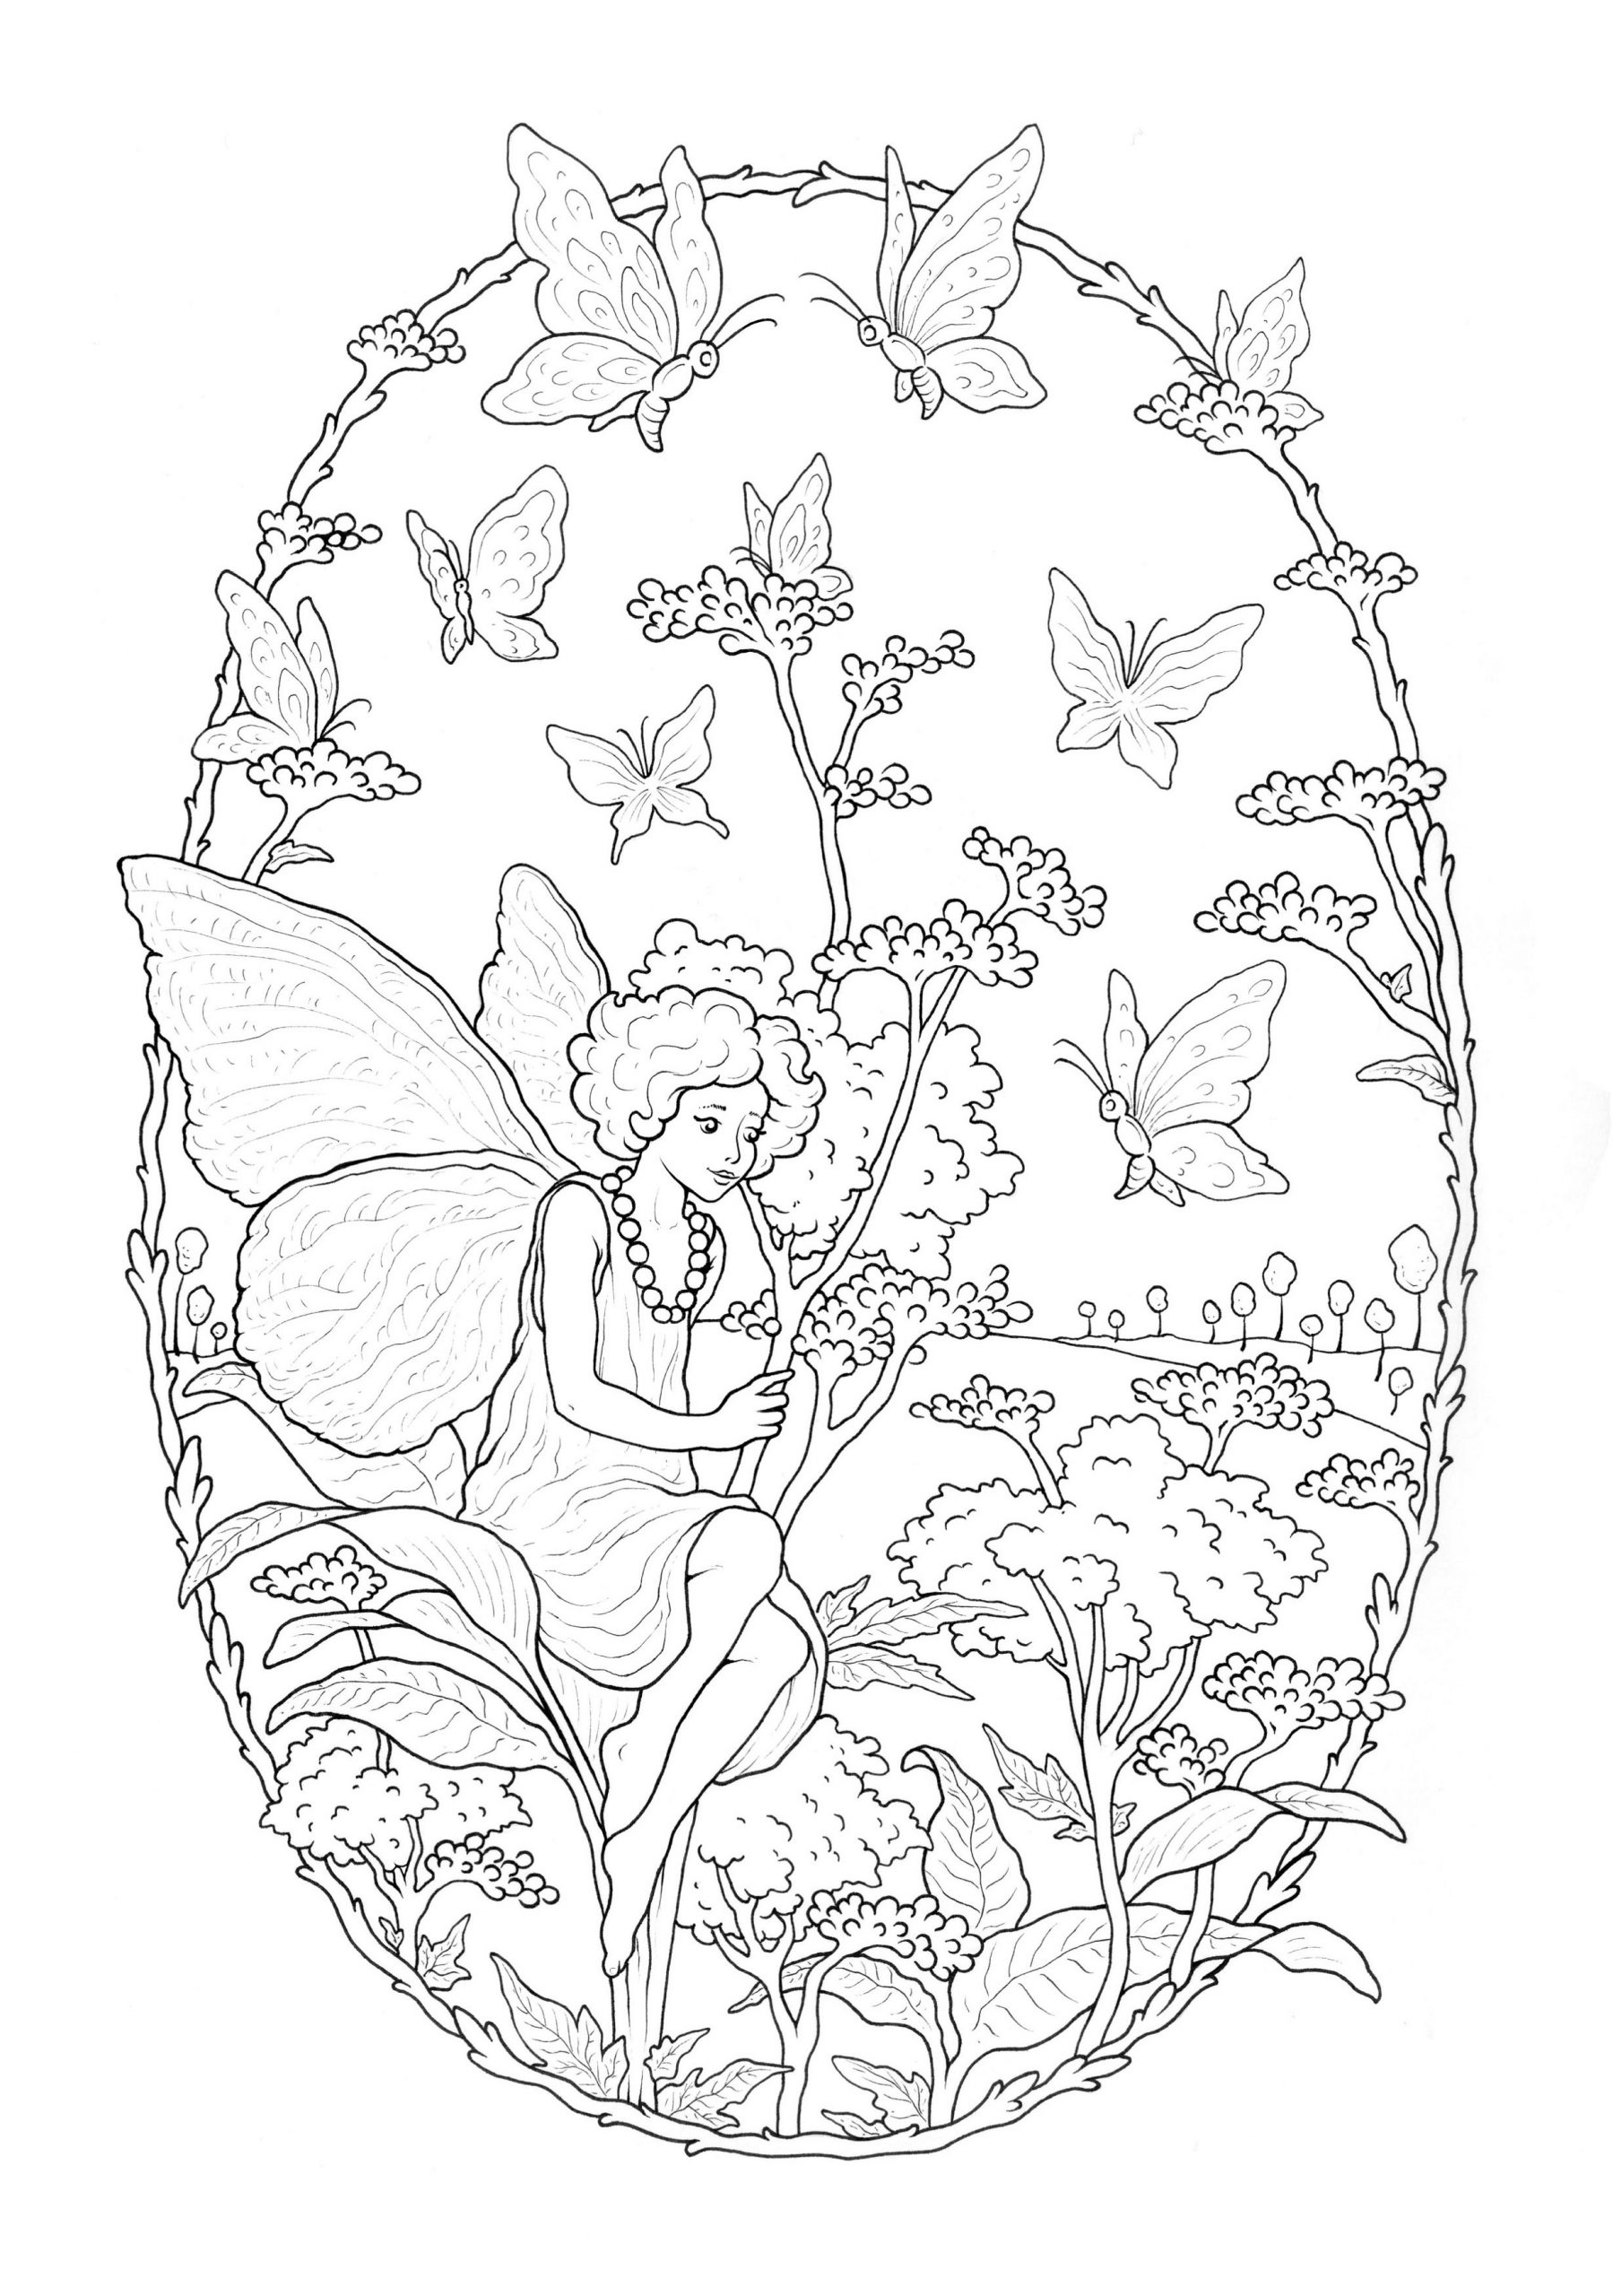 Fairy Anime Coloring Pages For Adults